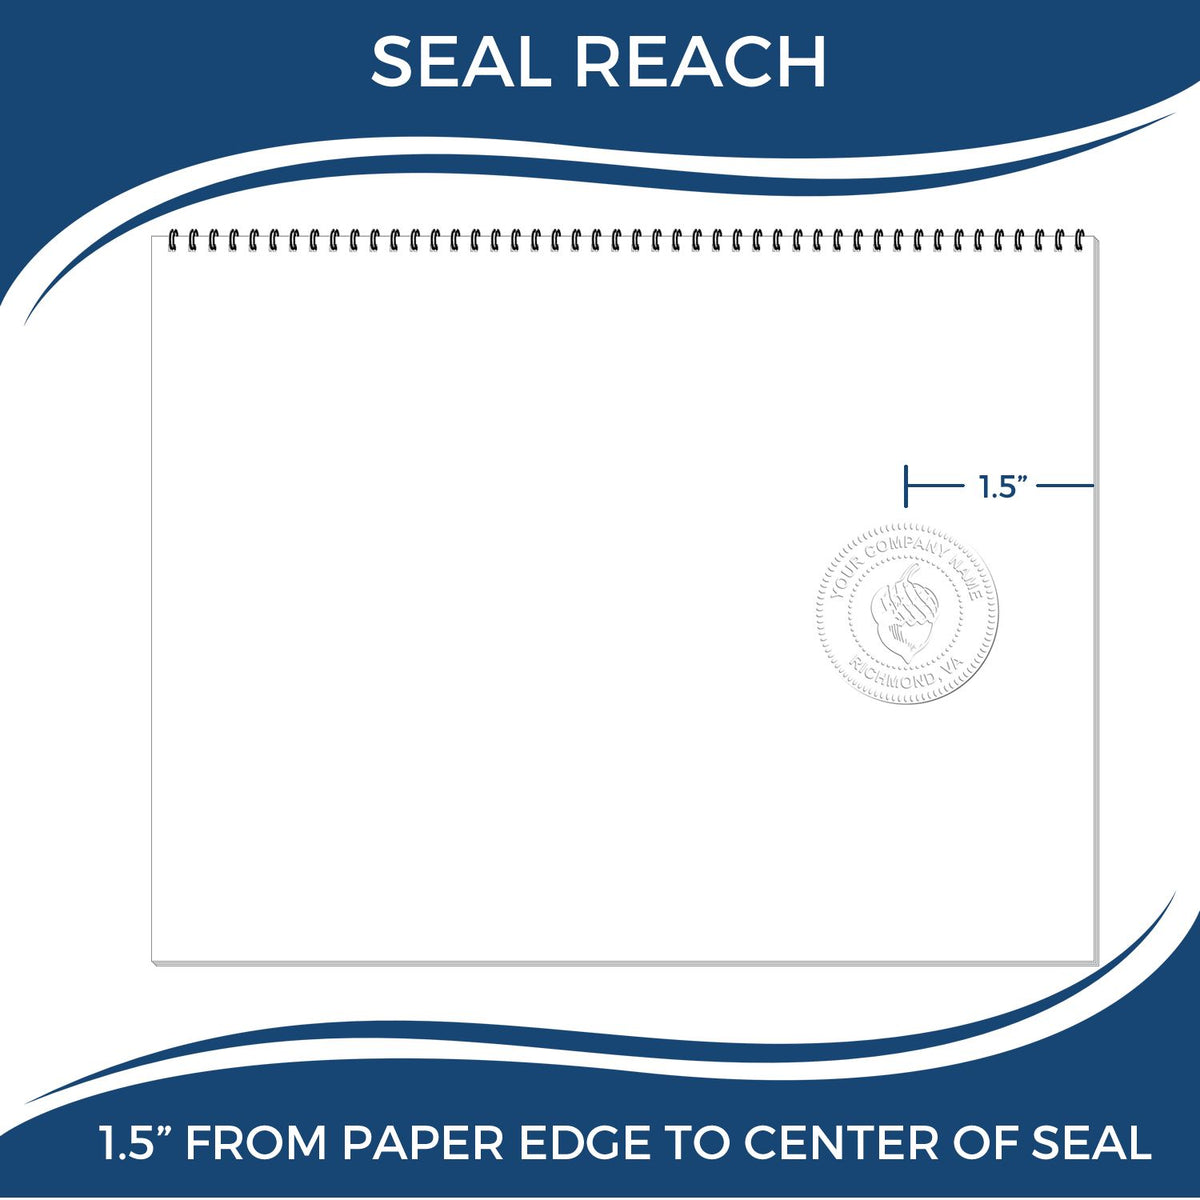 An infographic showing the seal reach which is represented by a ruler and a miniature seal image of the Hybrid Maine Land Surveyor Seal